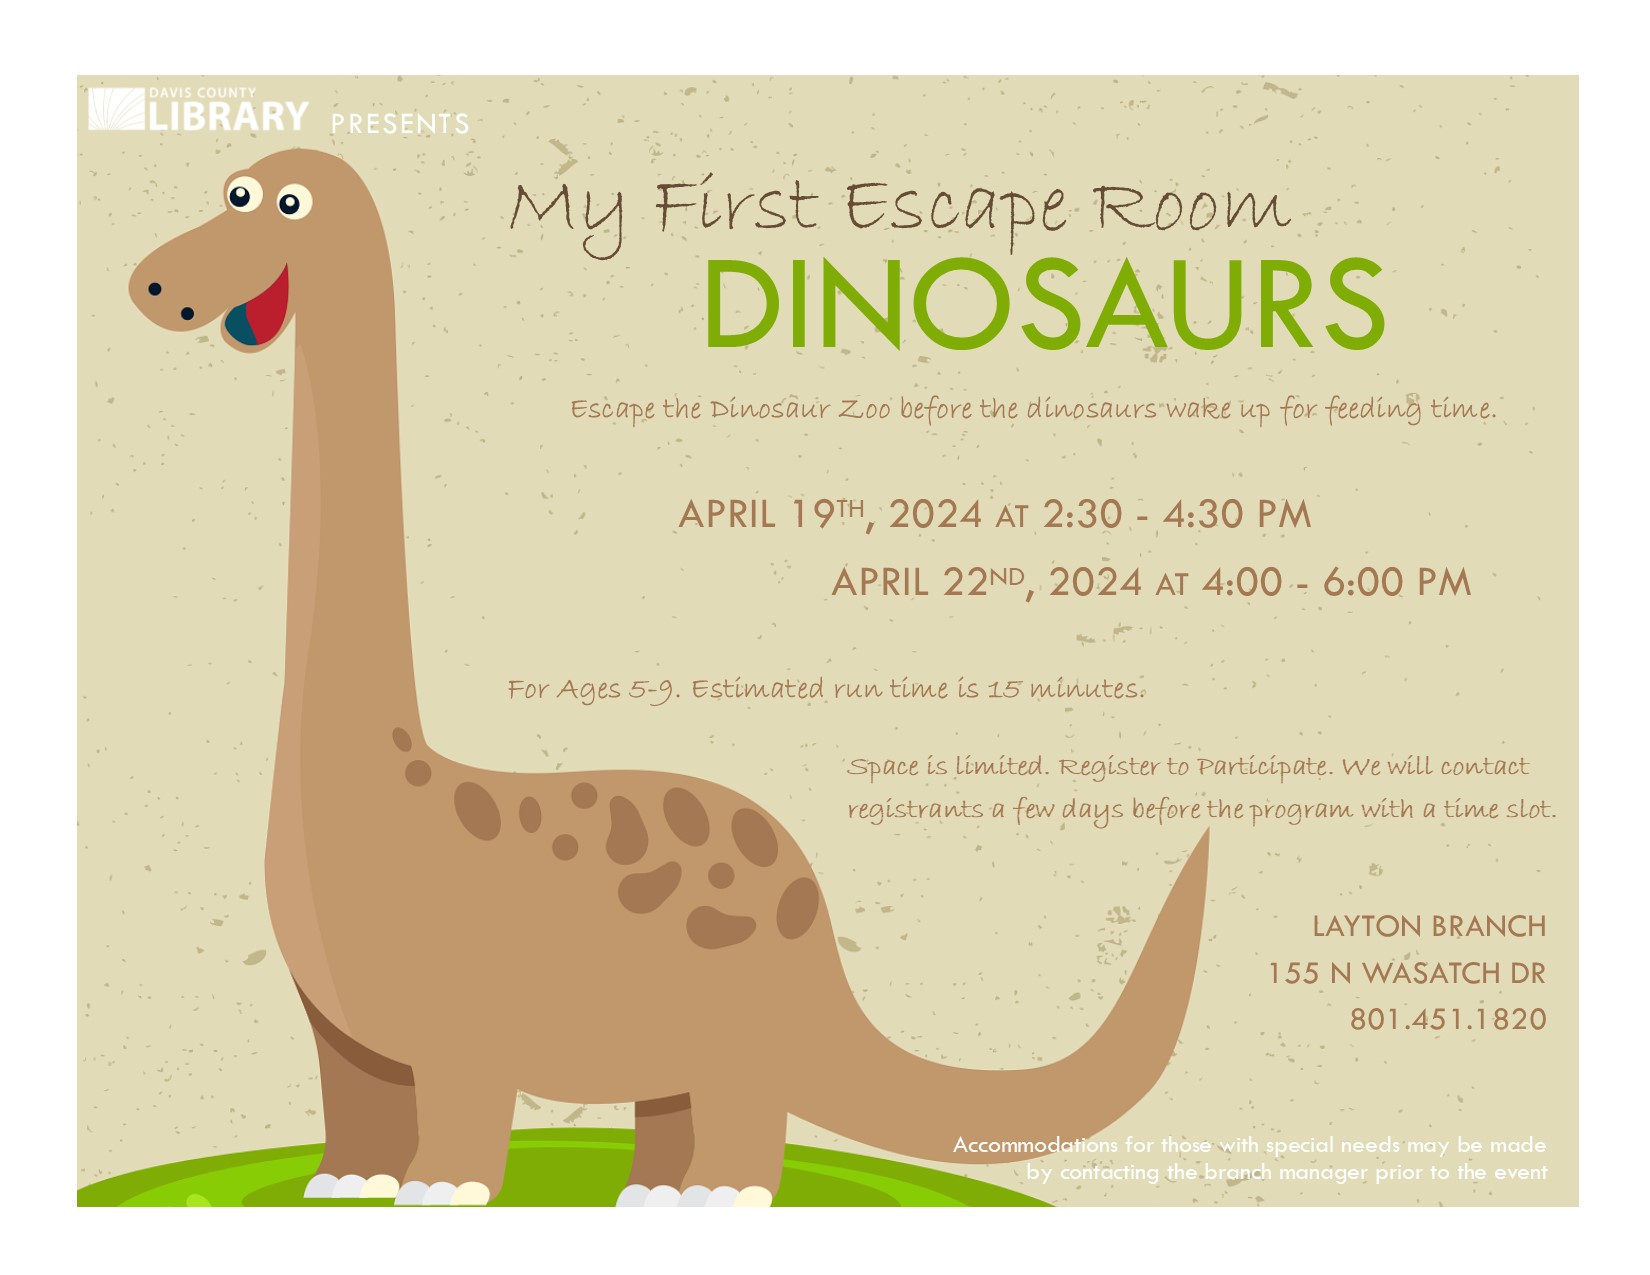 My First Escape Room - Dinosaurs - for Ages 5-9. April 19 2:30-4:30 or April 22 4-6. Register to Participate.